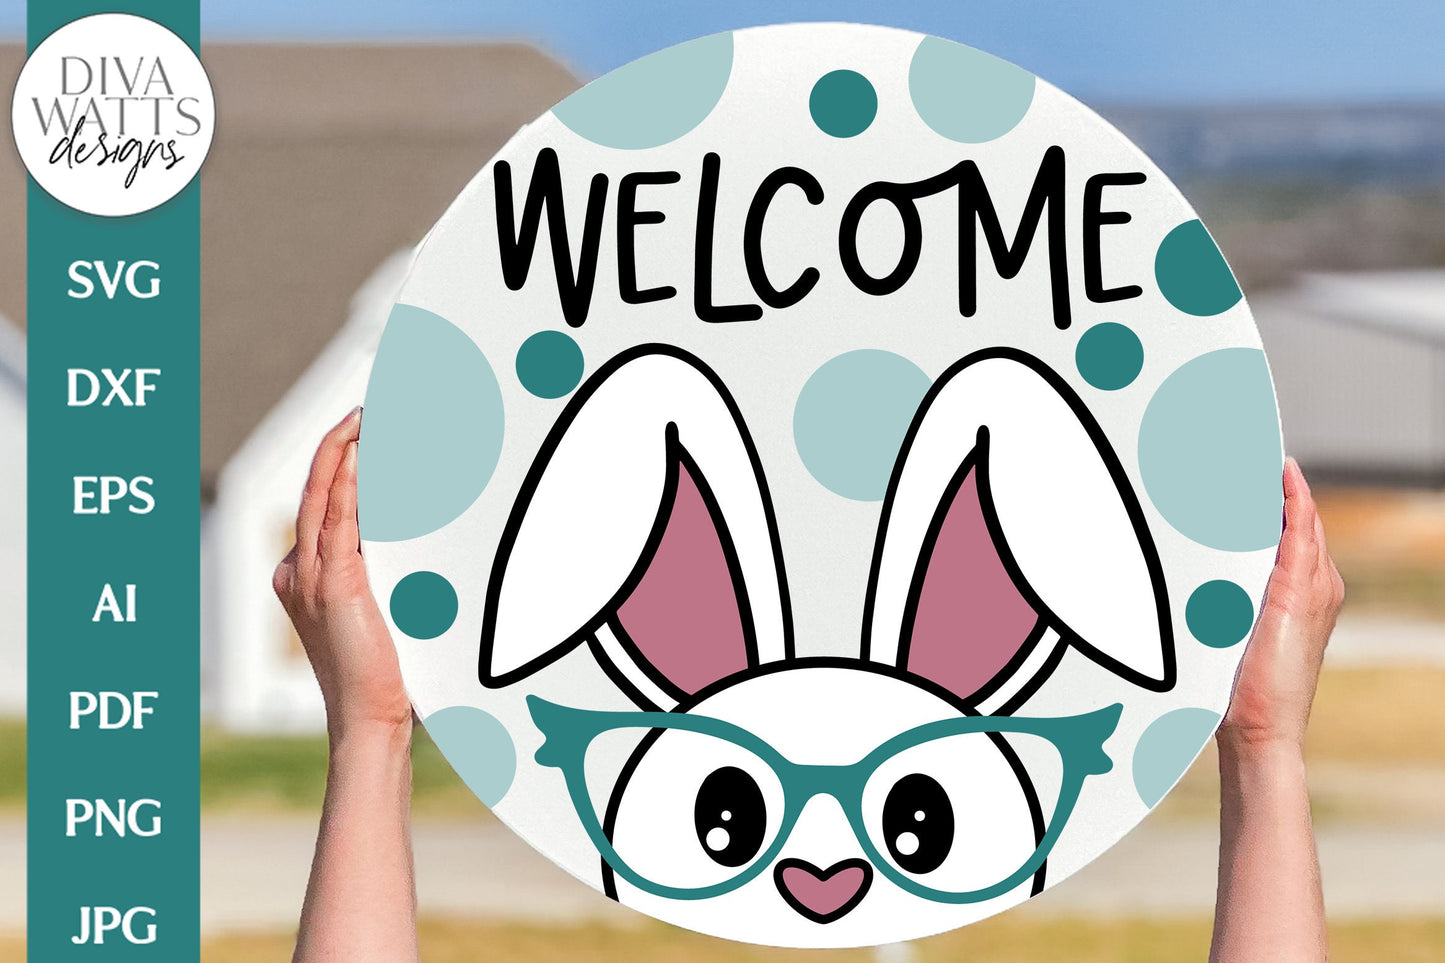 Welcome SVG | Spring Easter Bunny With Glasses Design